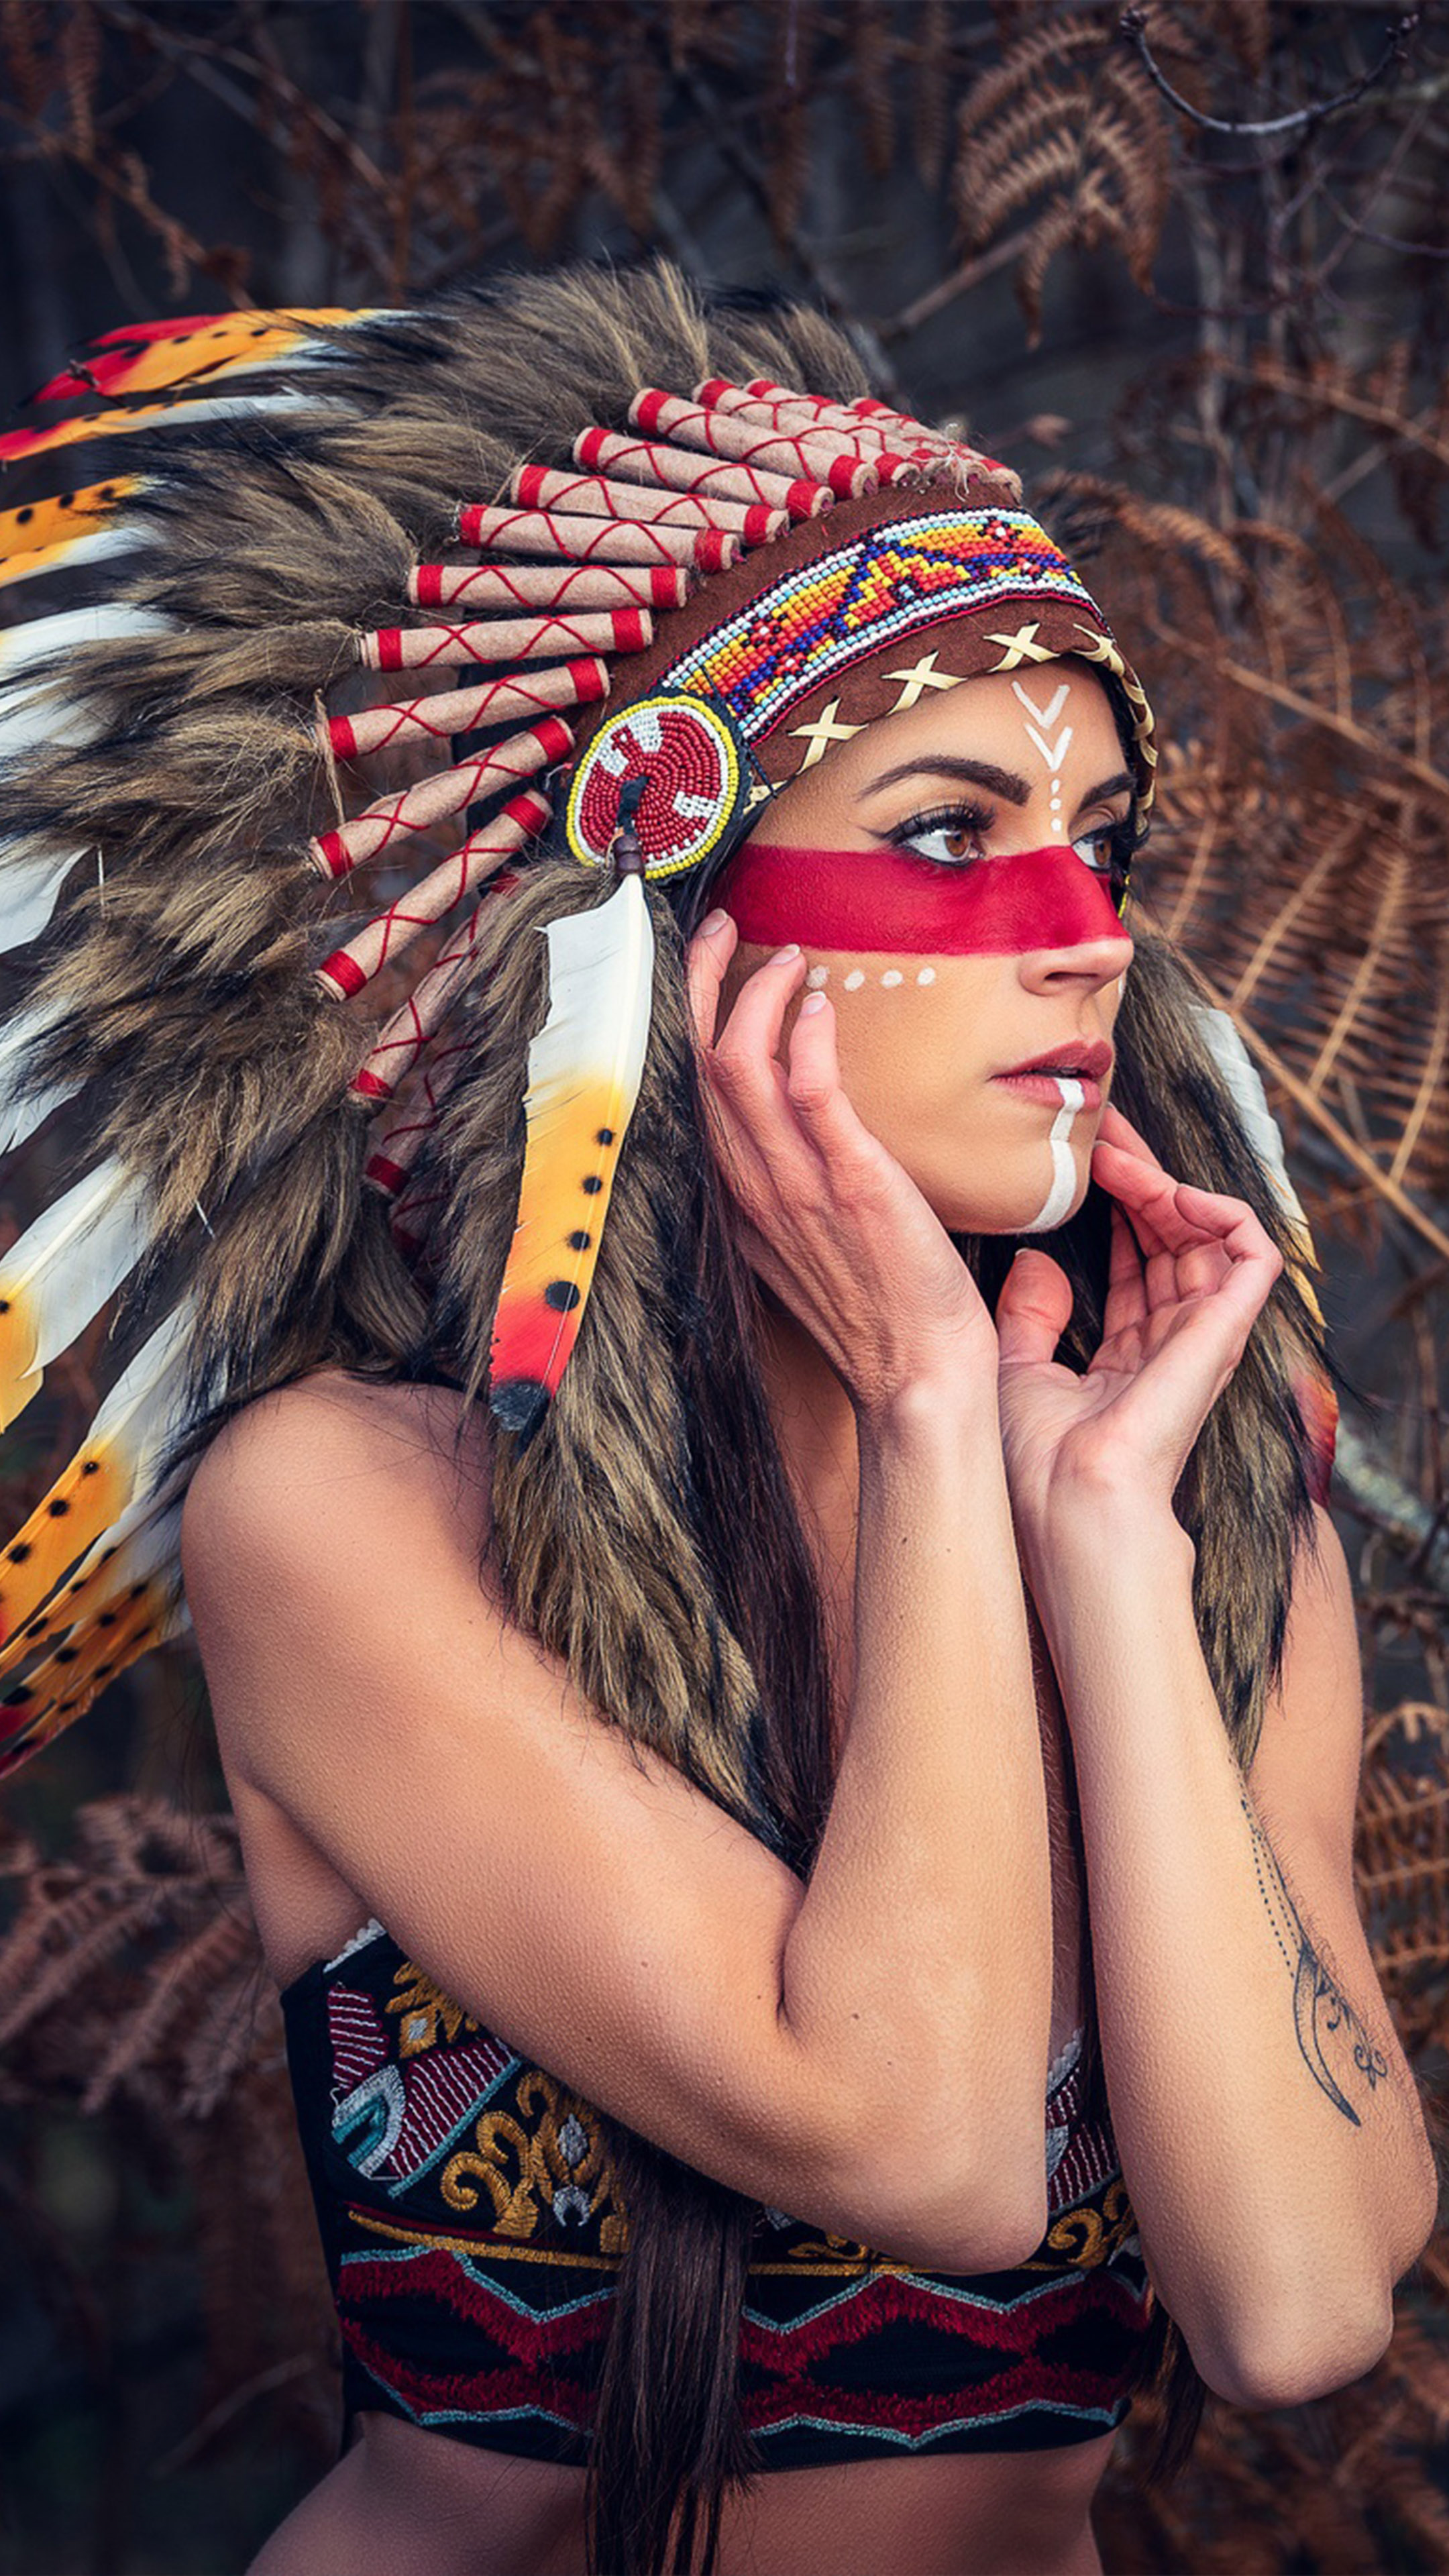 American Indian Wallpaper 69 pictures